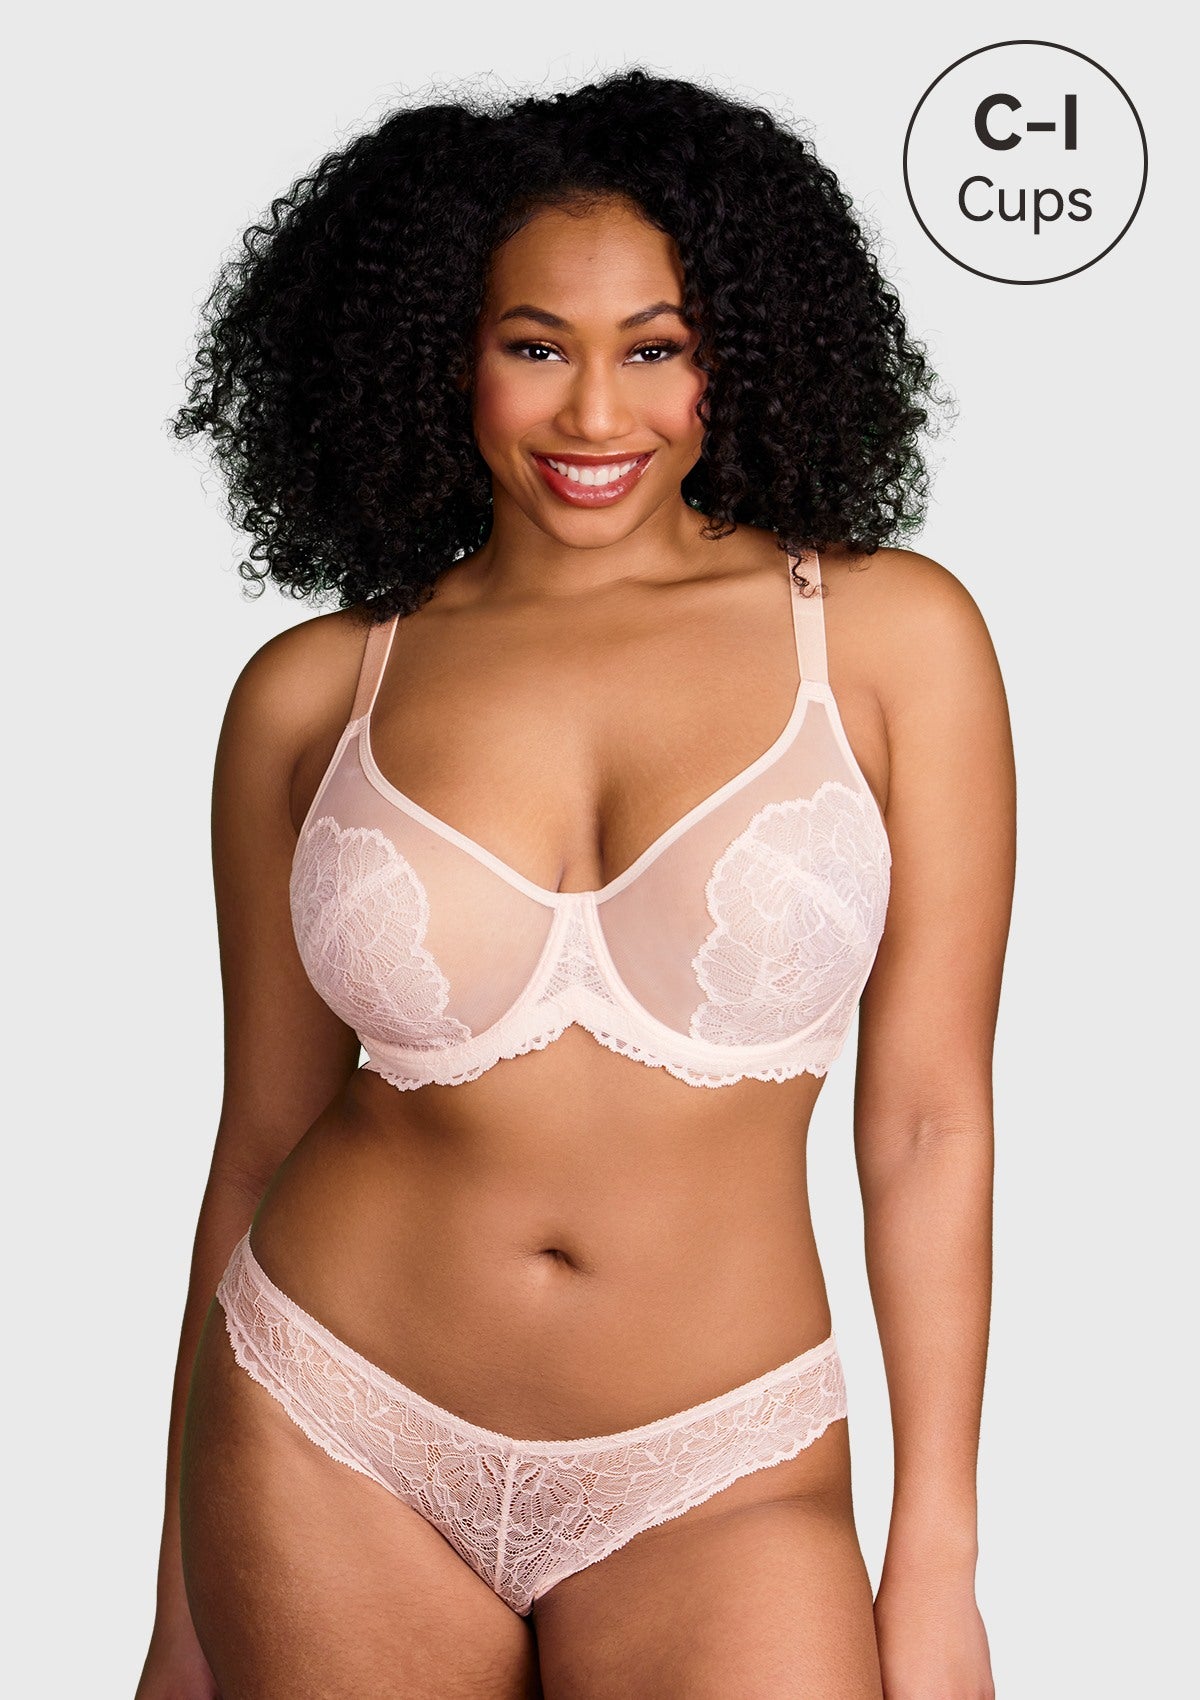 HSIA Blossom Sheer Lace Bra: Comfortable Underwire Bra For Big Busts - White / 36 / I